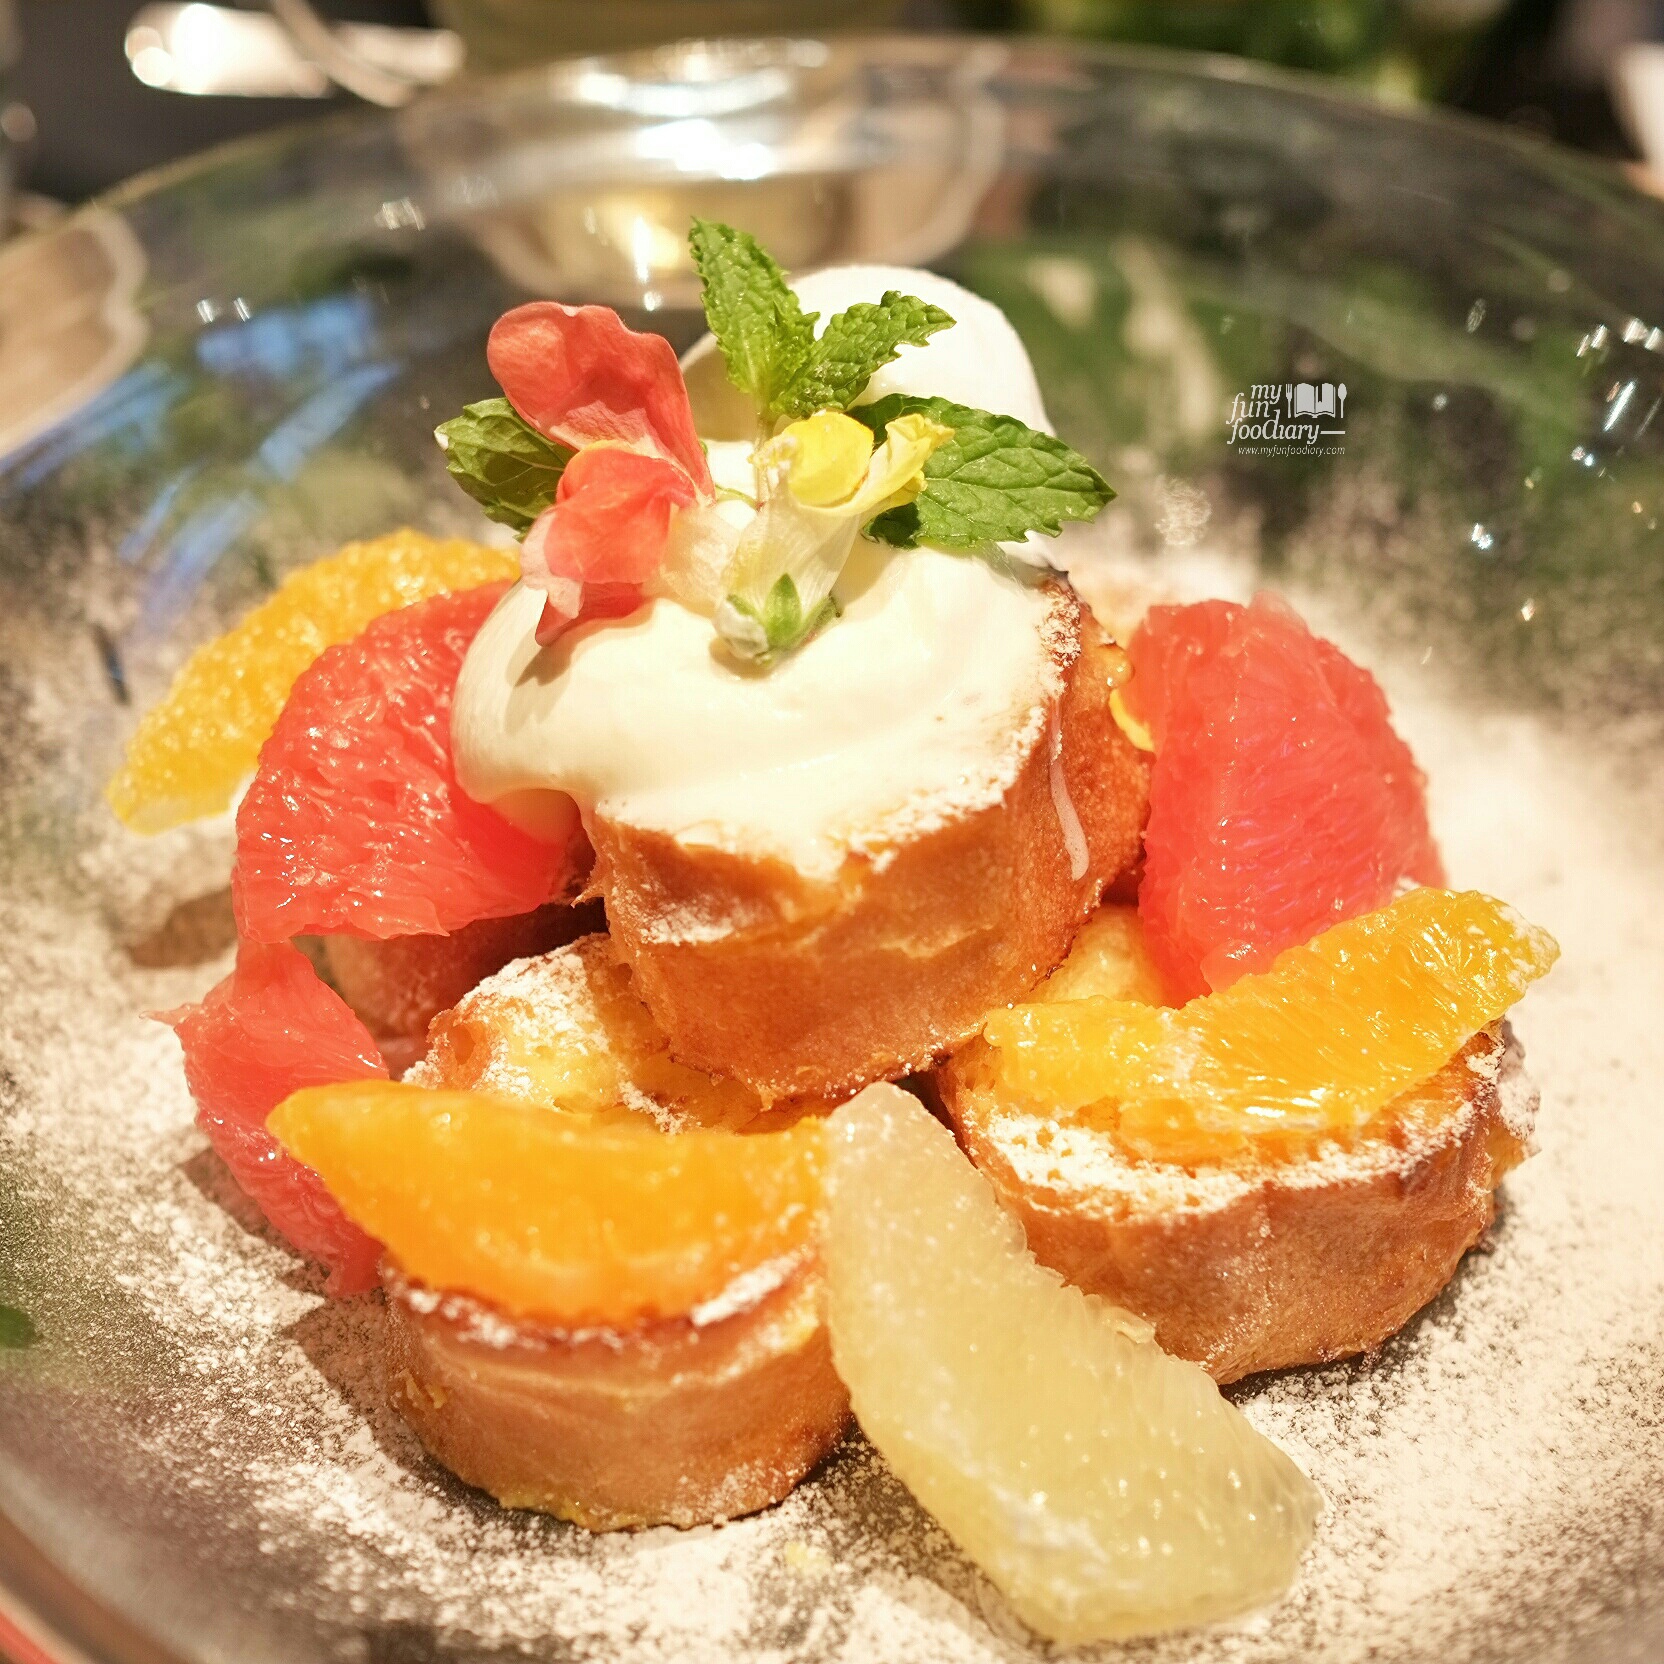 Flower French Toast at Aoyama Flower Market in Tokyo by Myfunfoodiary 01